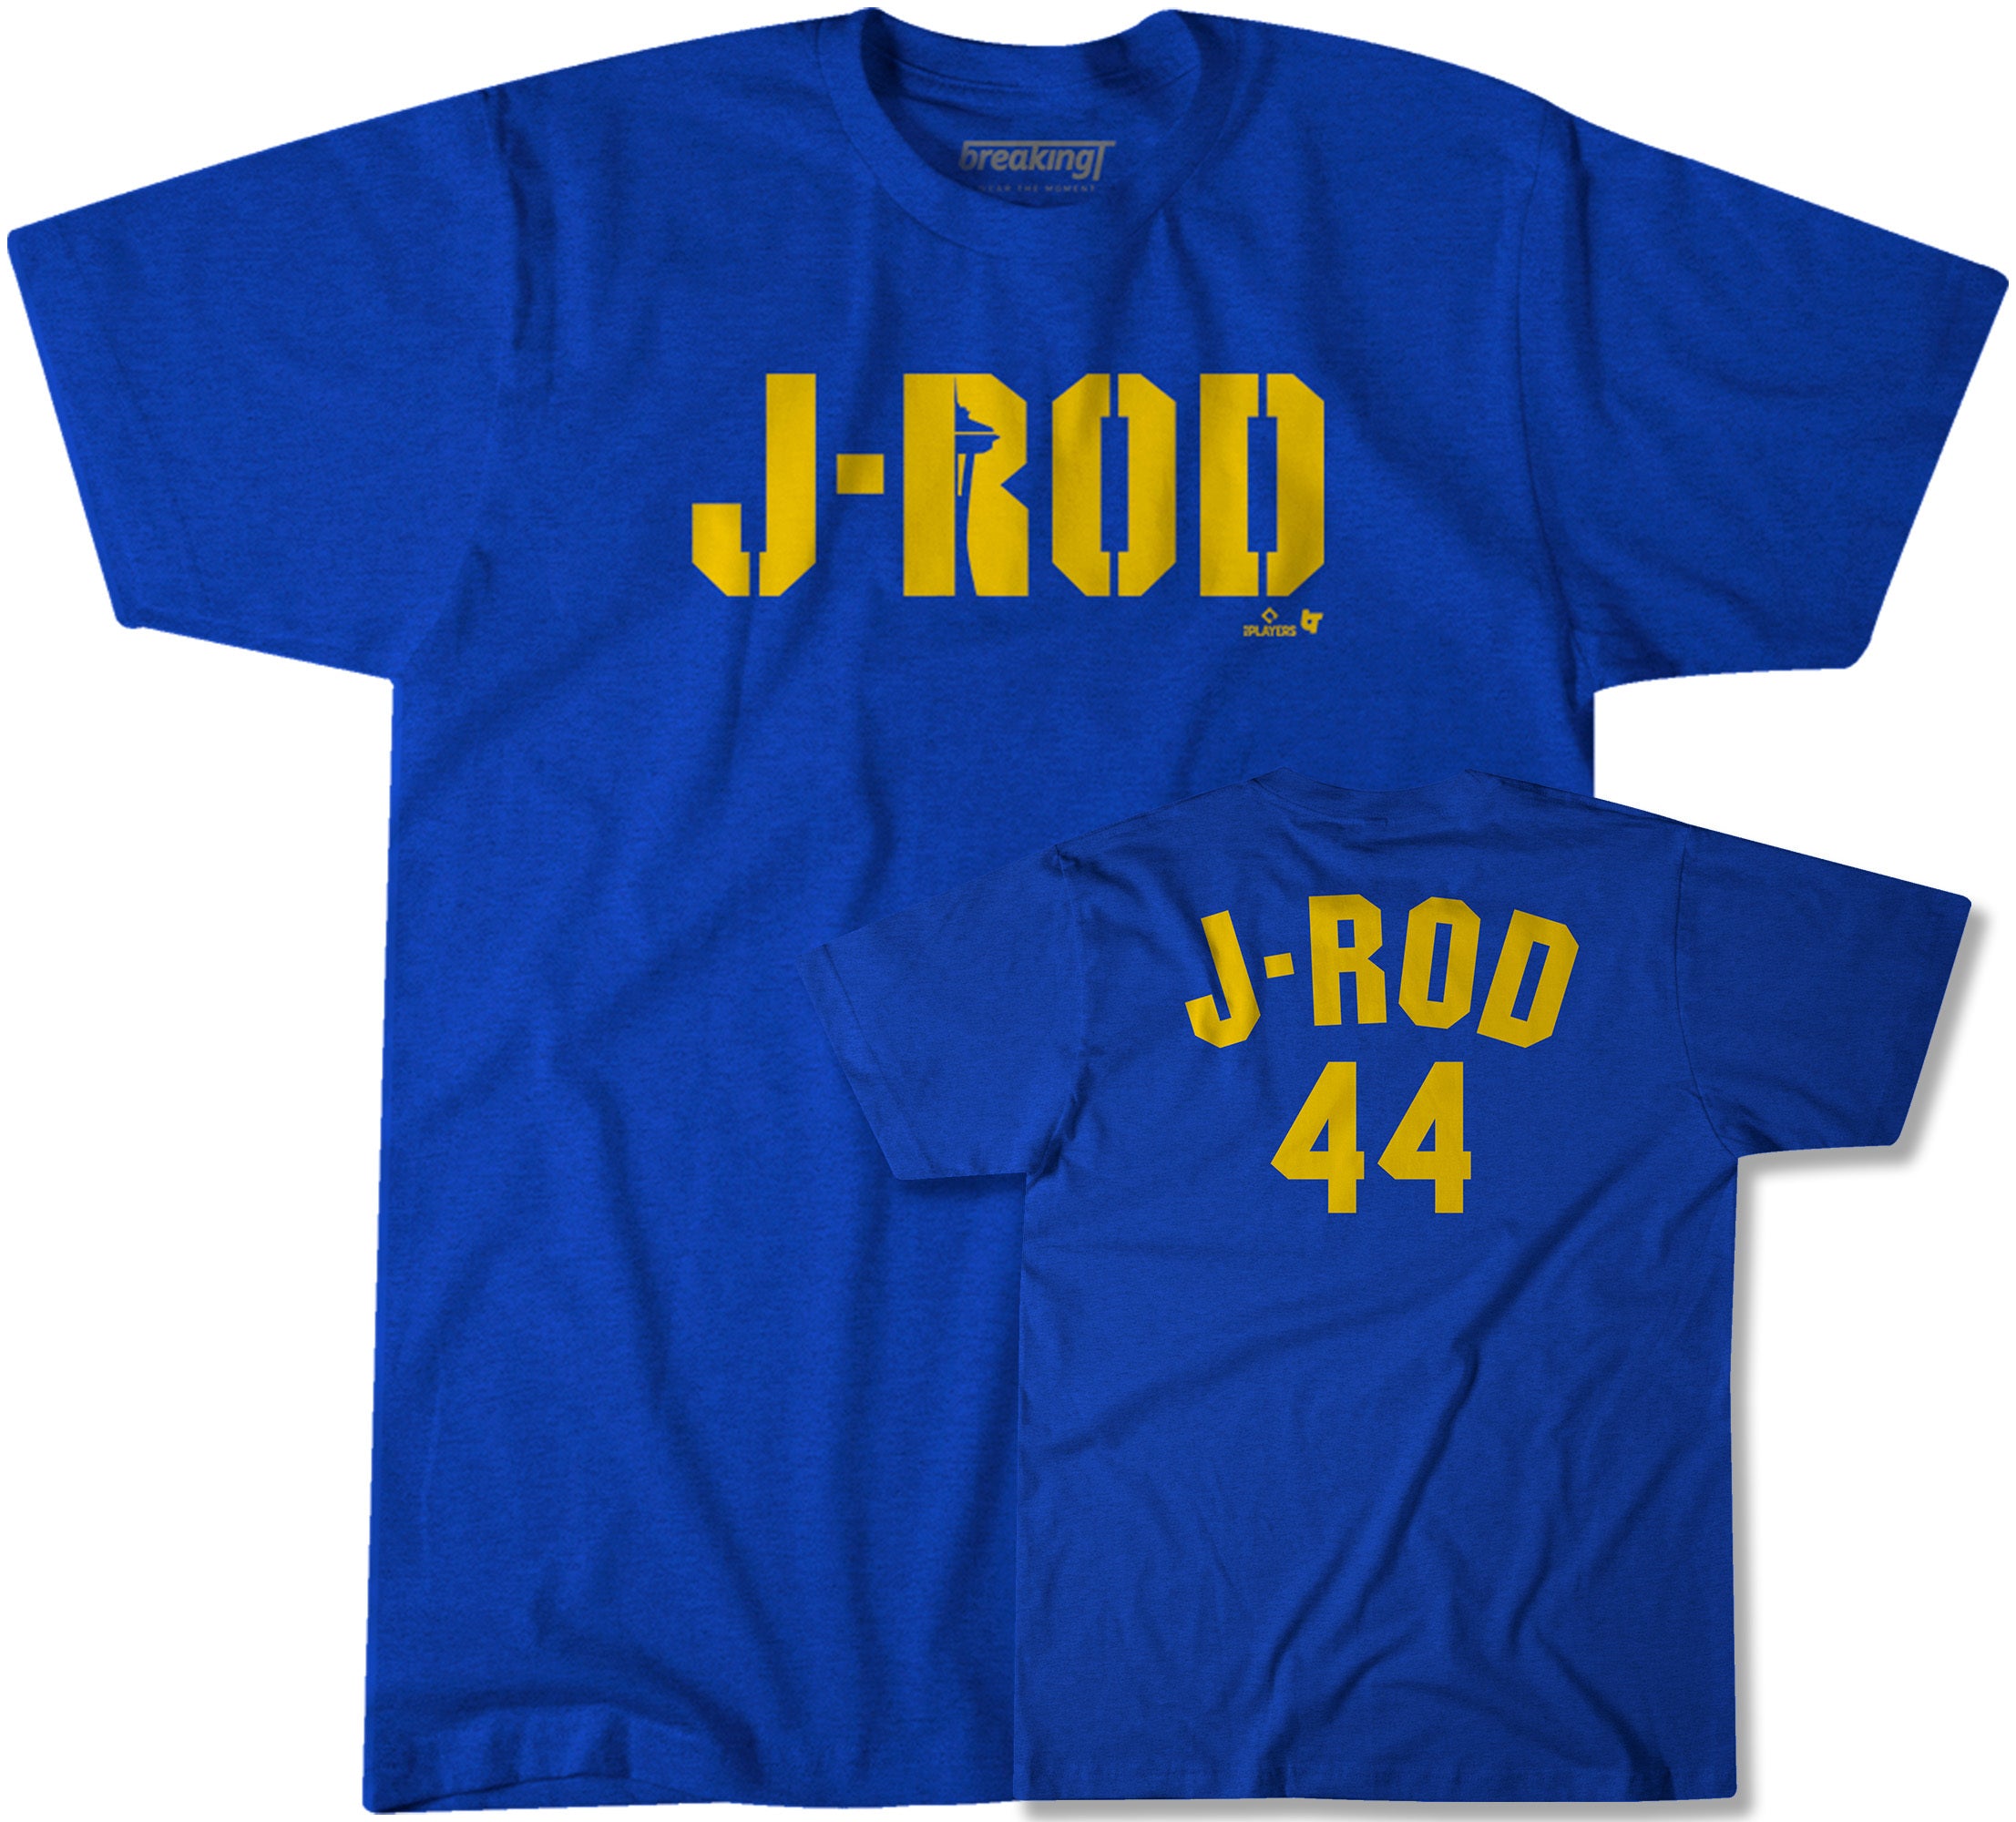 Official Julio Rodriguez J-Rod Squad No Fly Zone 2023 shirt